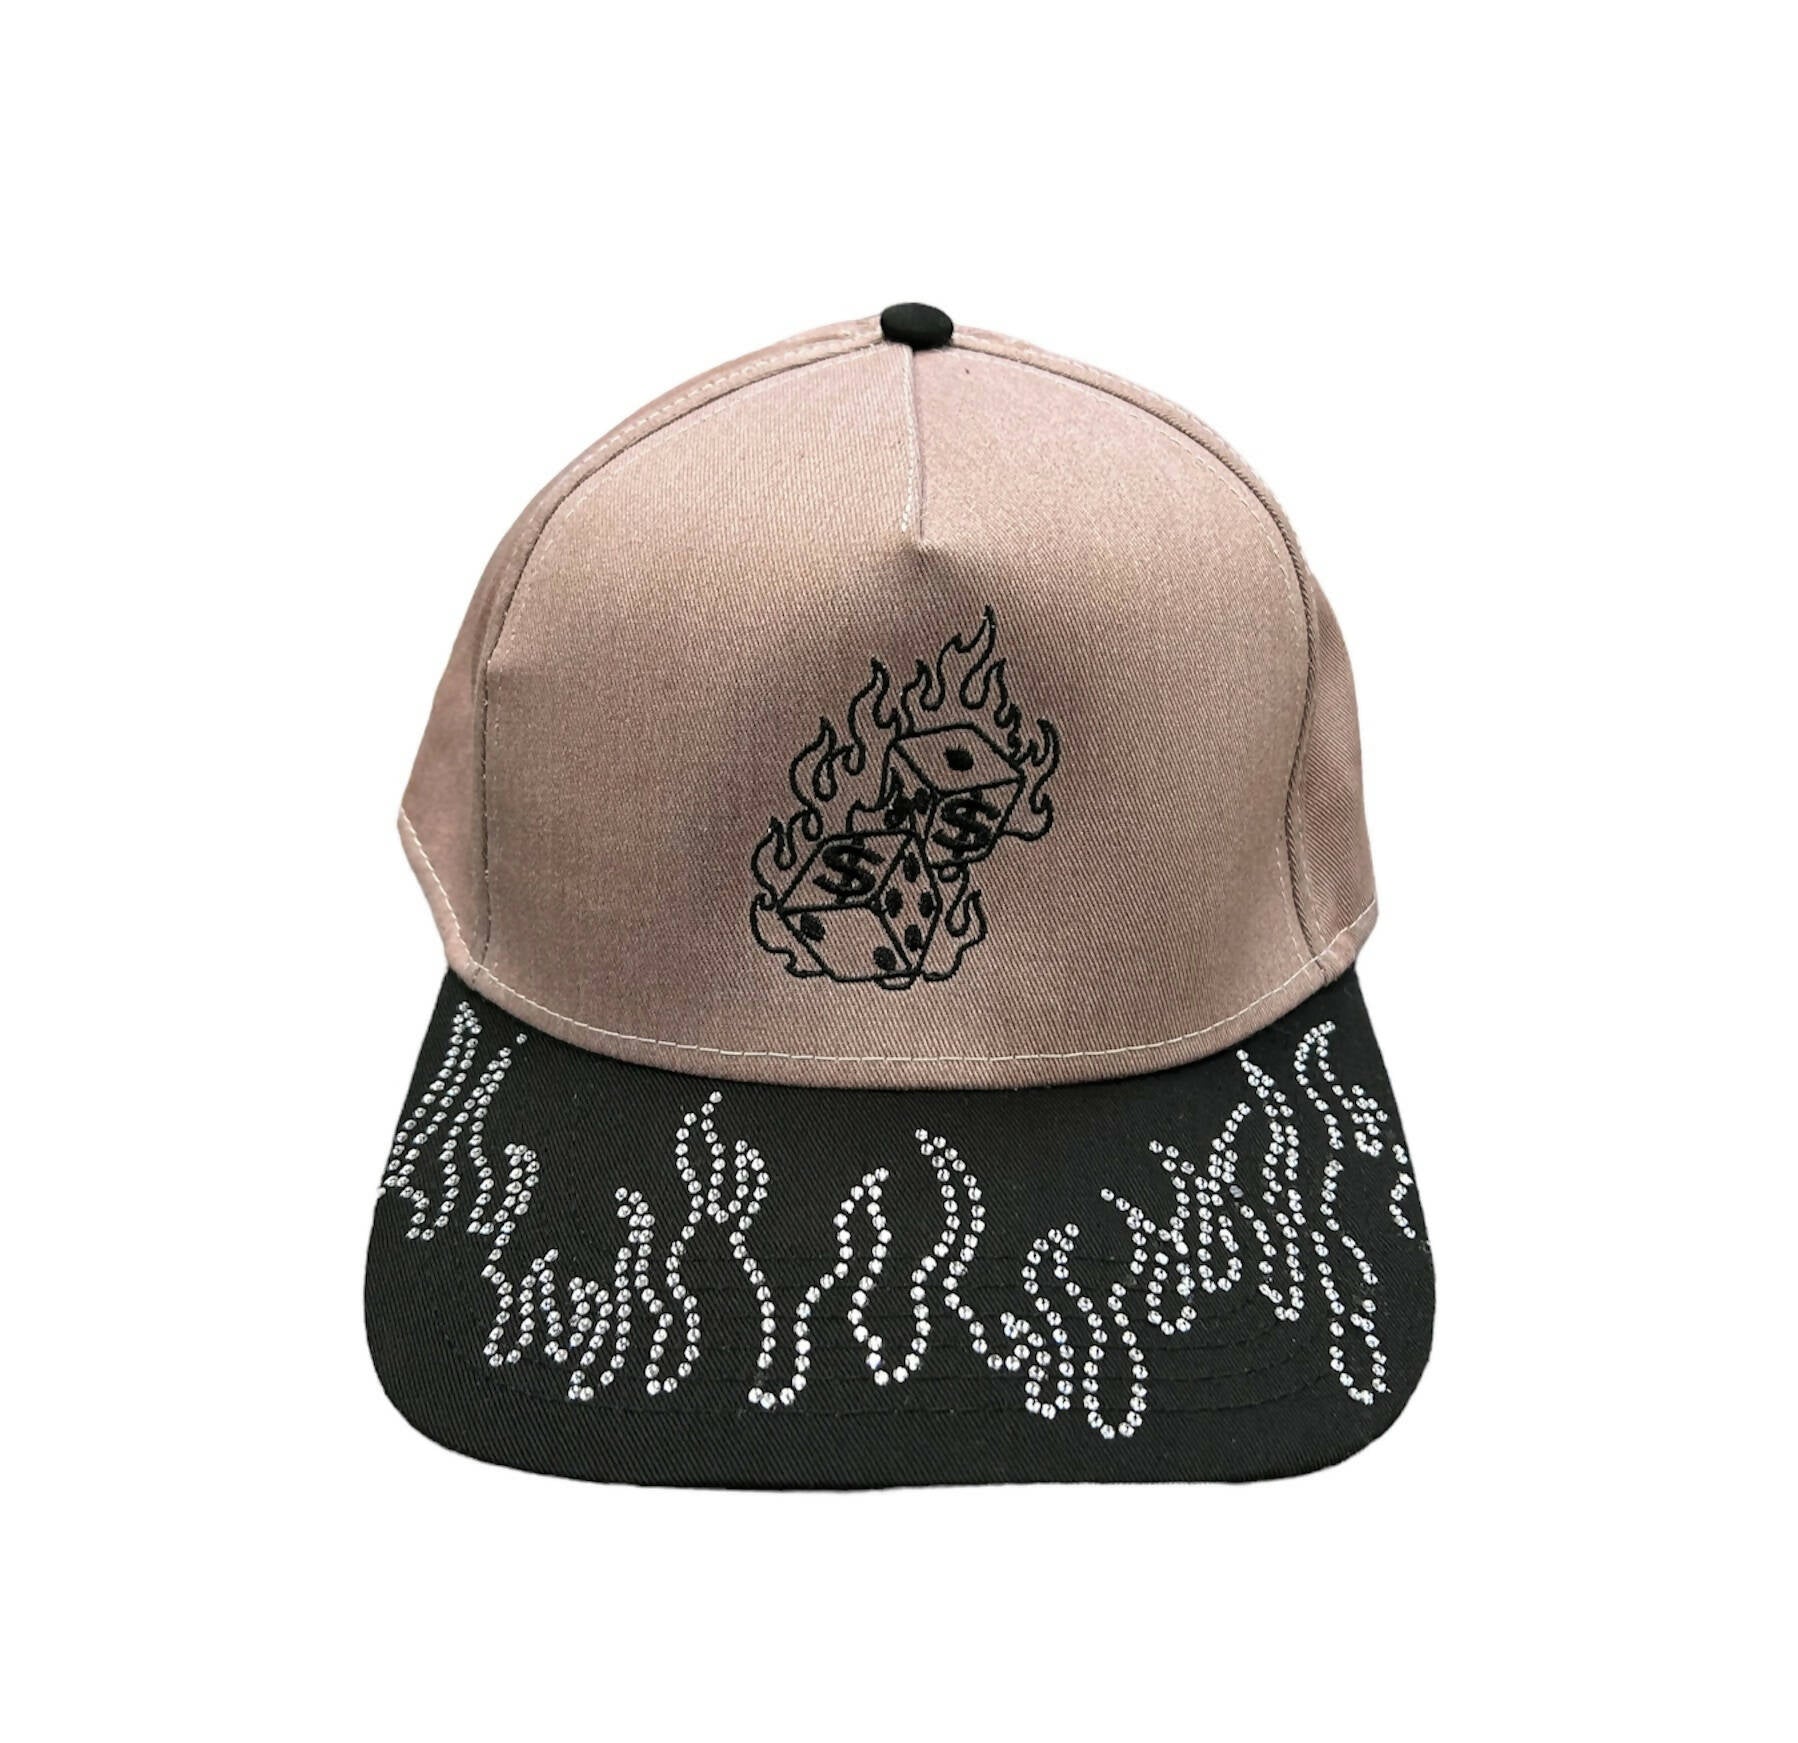 Brown Dyed “Roll the Dice” Snapback hat